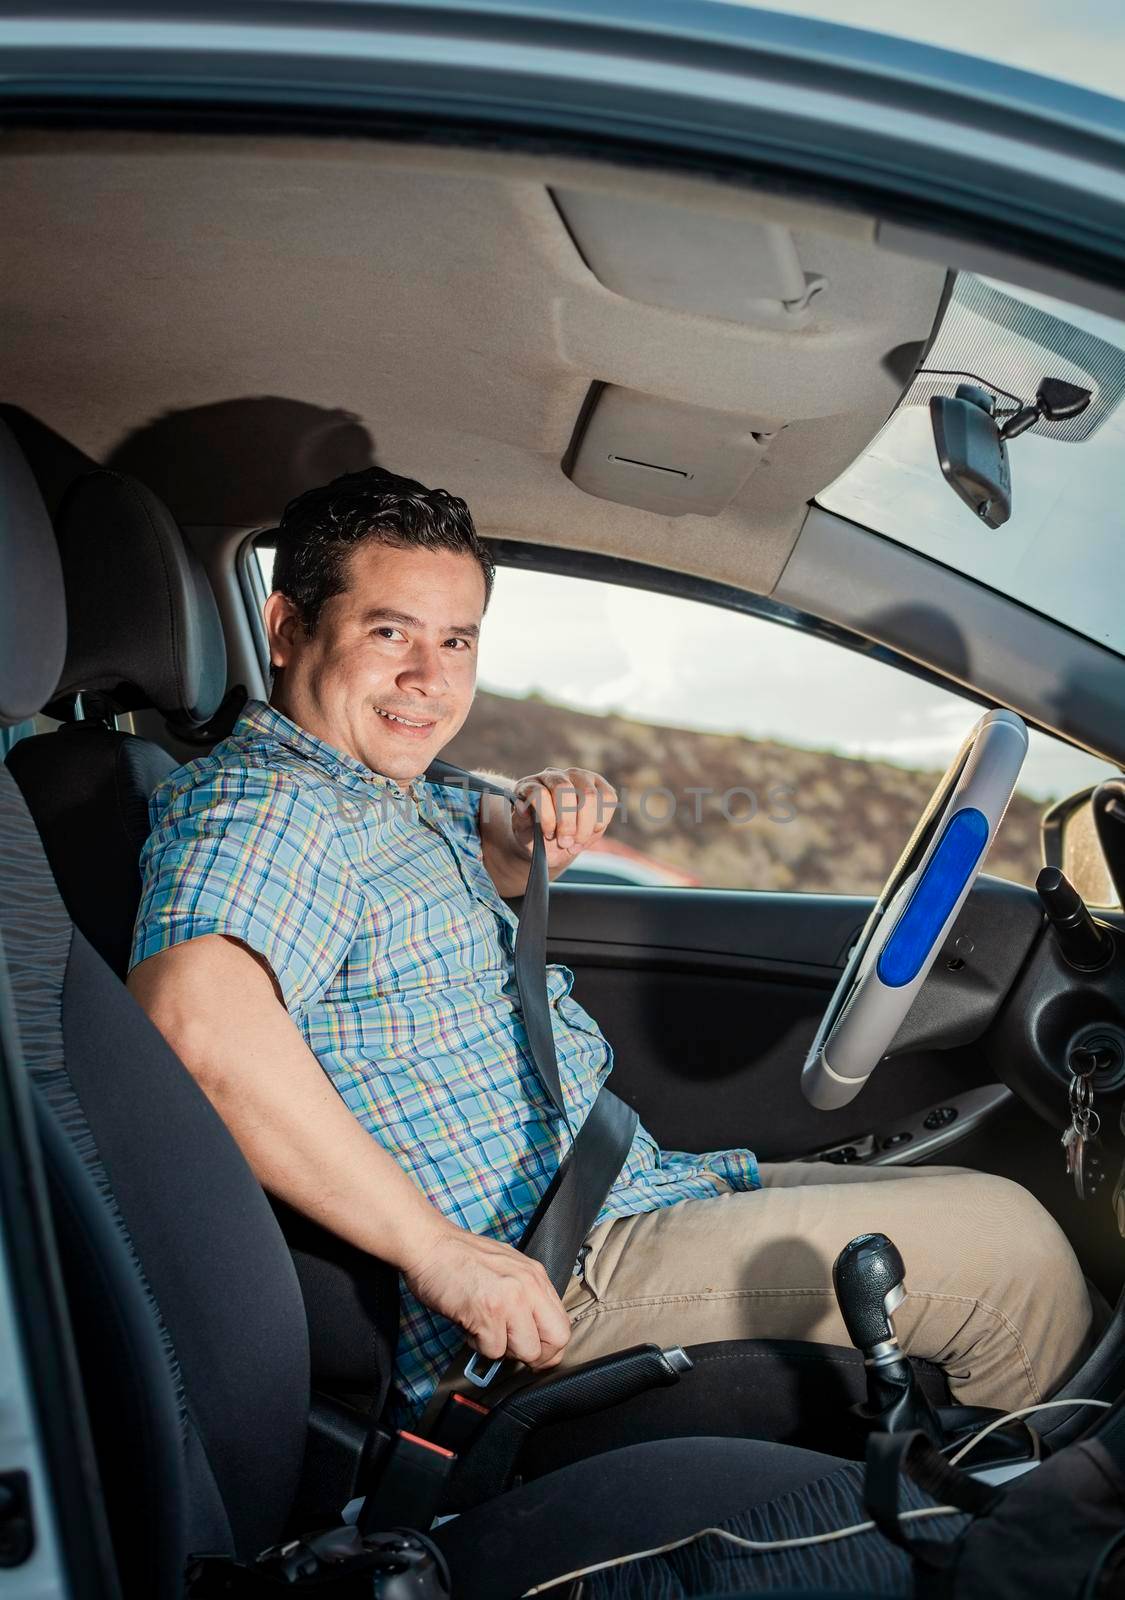 Happy driver putting on his seat belt, Smiling male driver putting on his seat belt. Concept of a driver in his car putting on his seat belt. Smiling person putting on seat belt